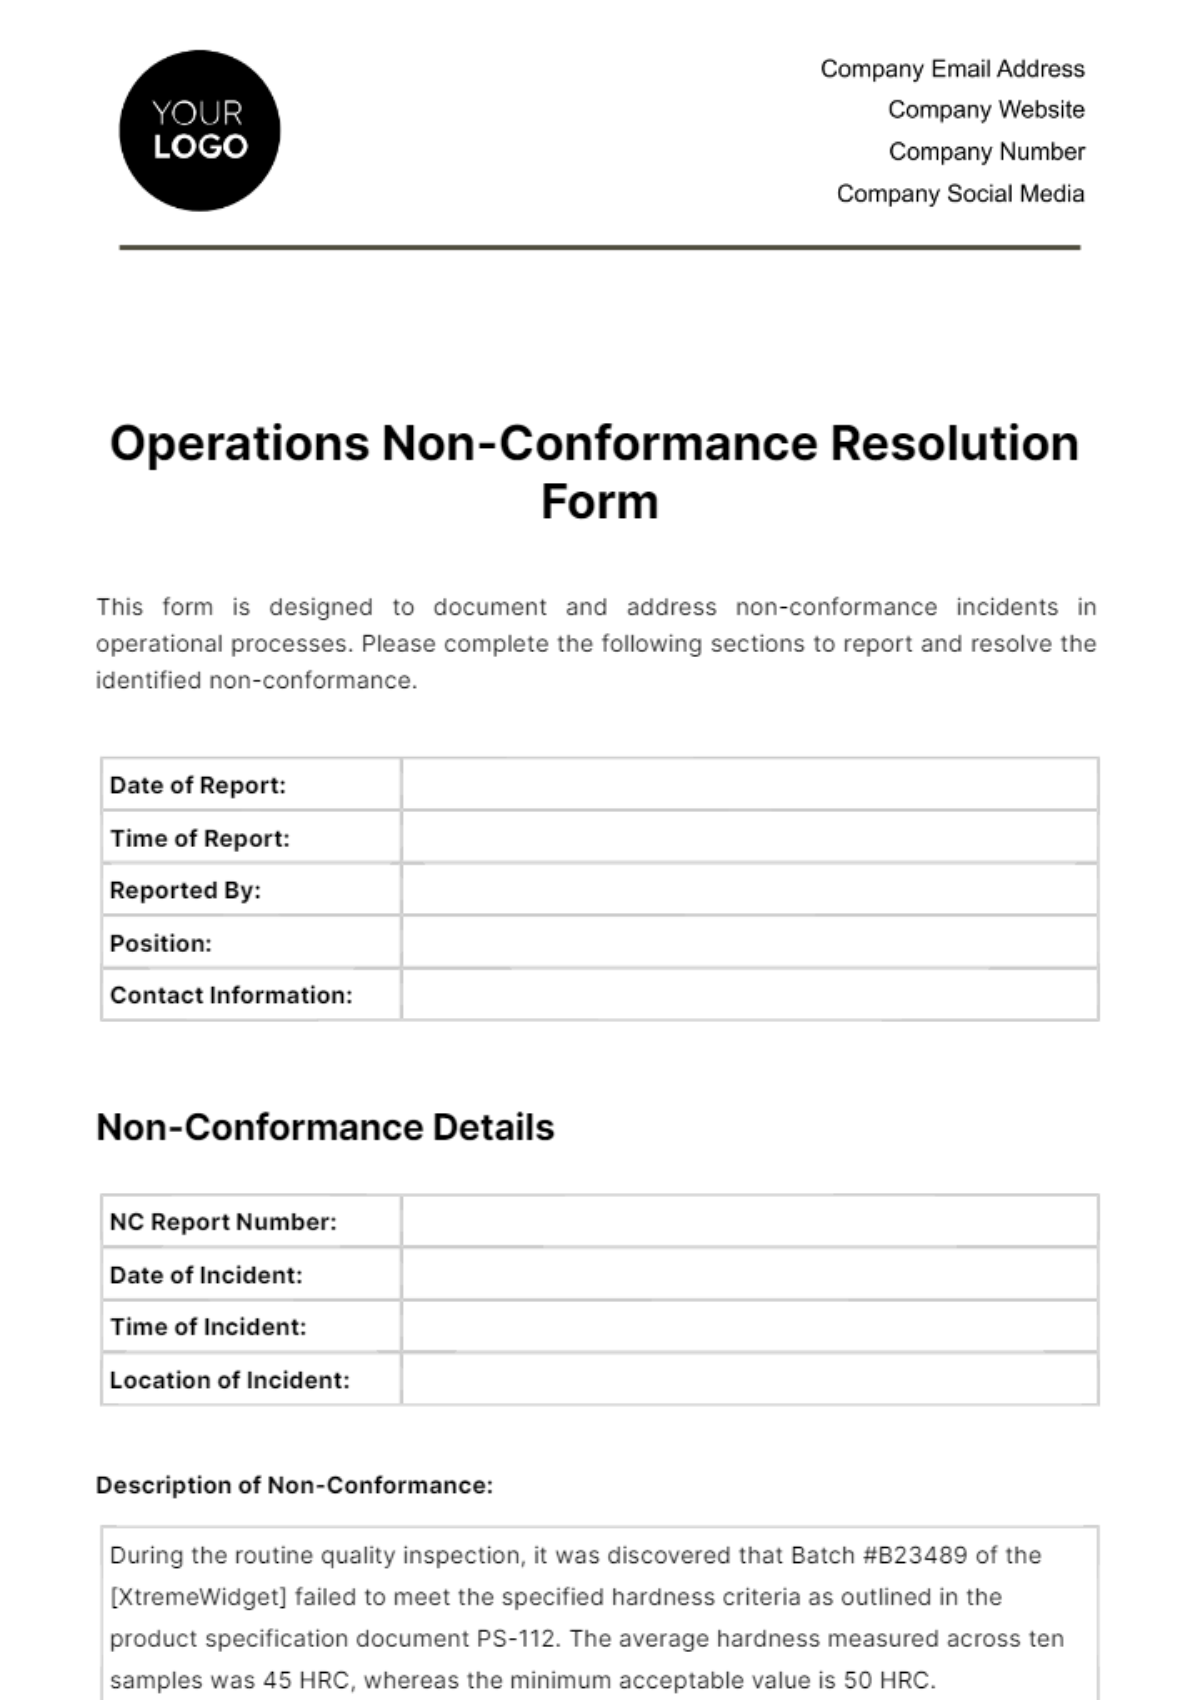 Free Operations Non-Conformance Resolution Form Template